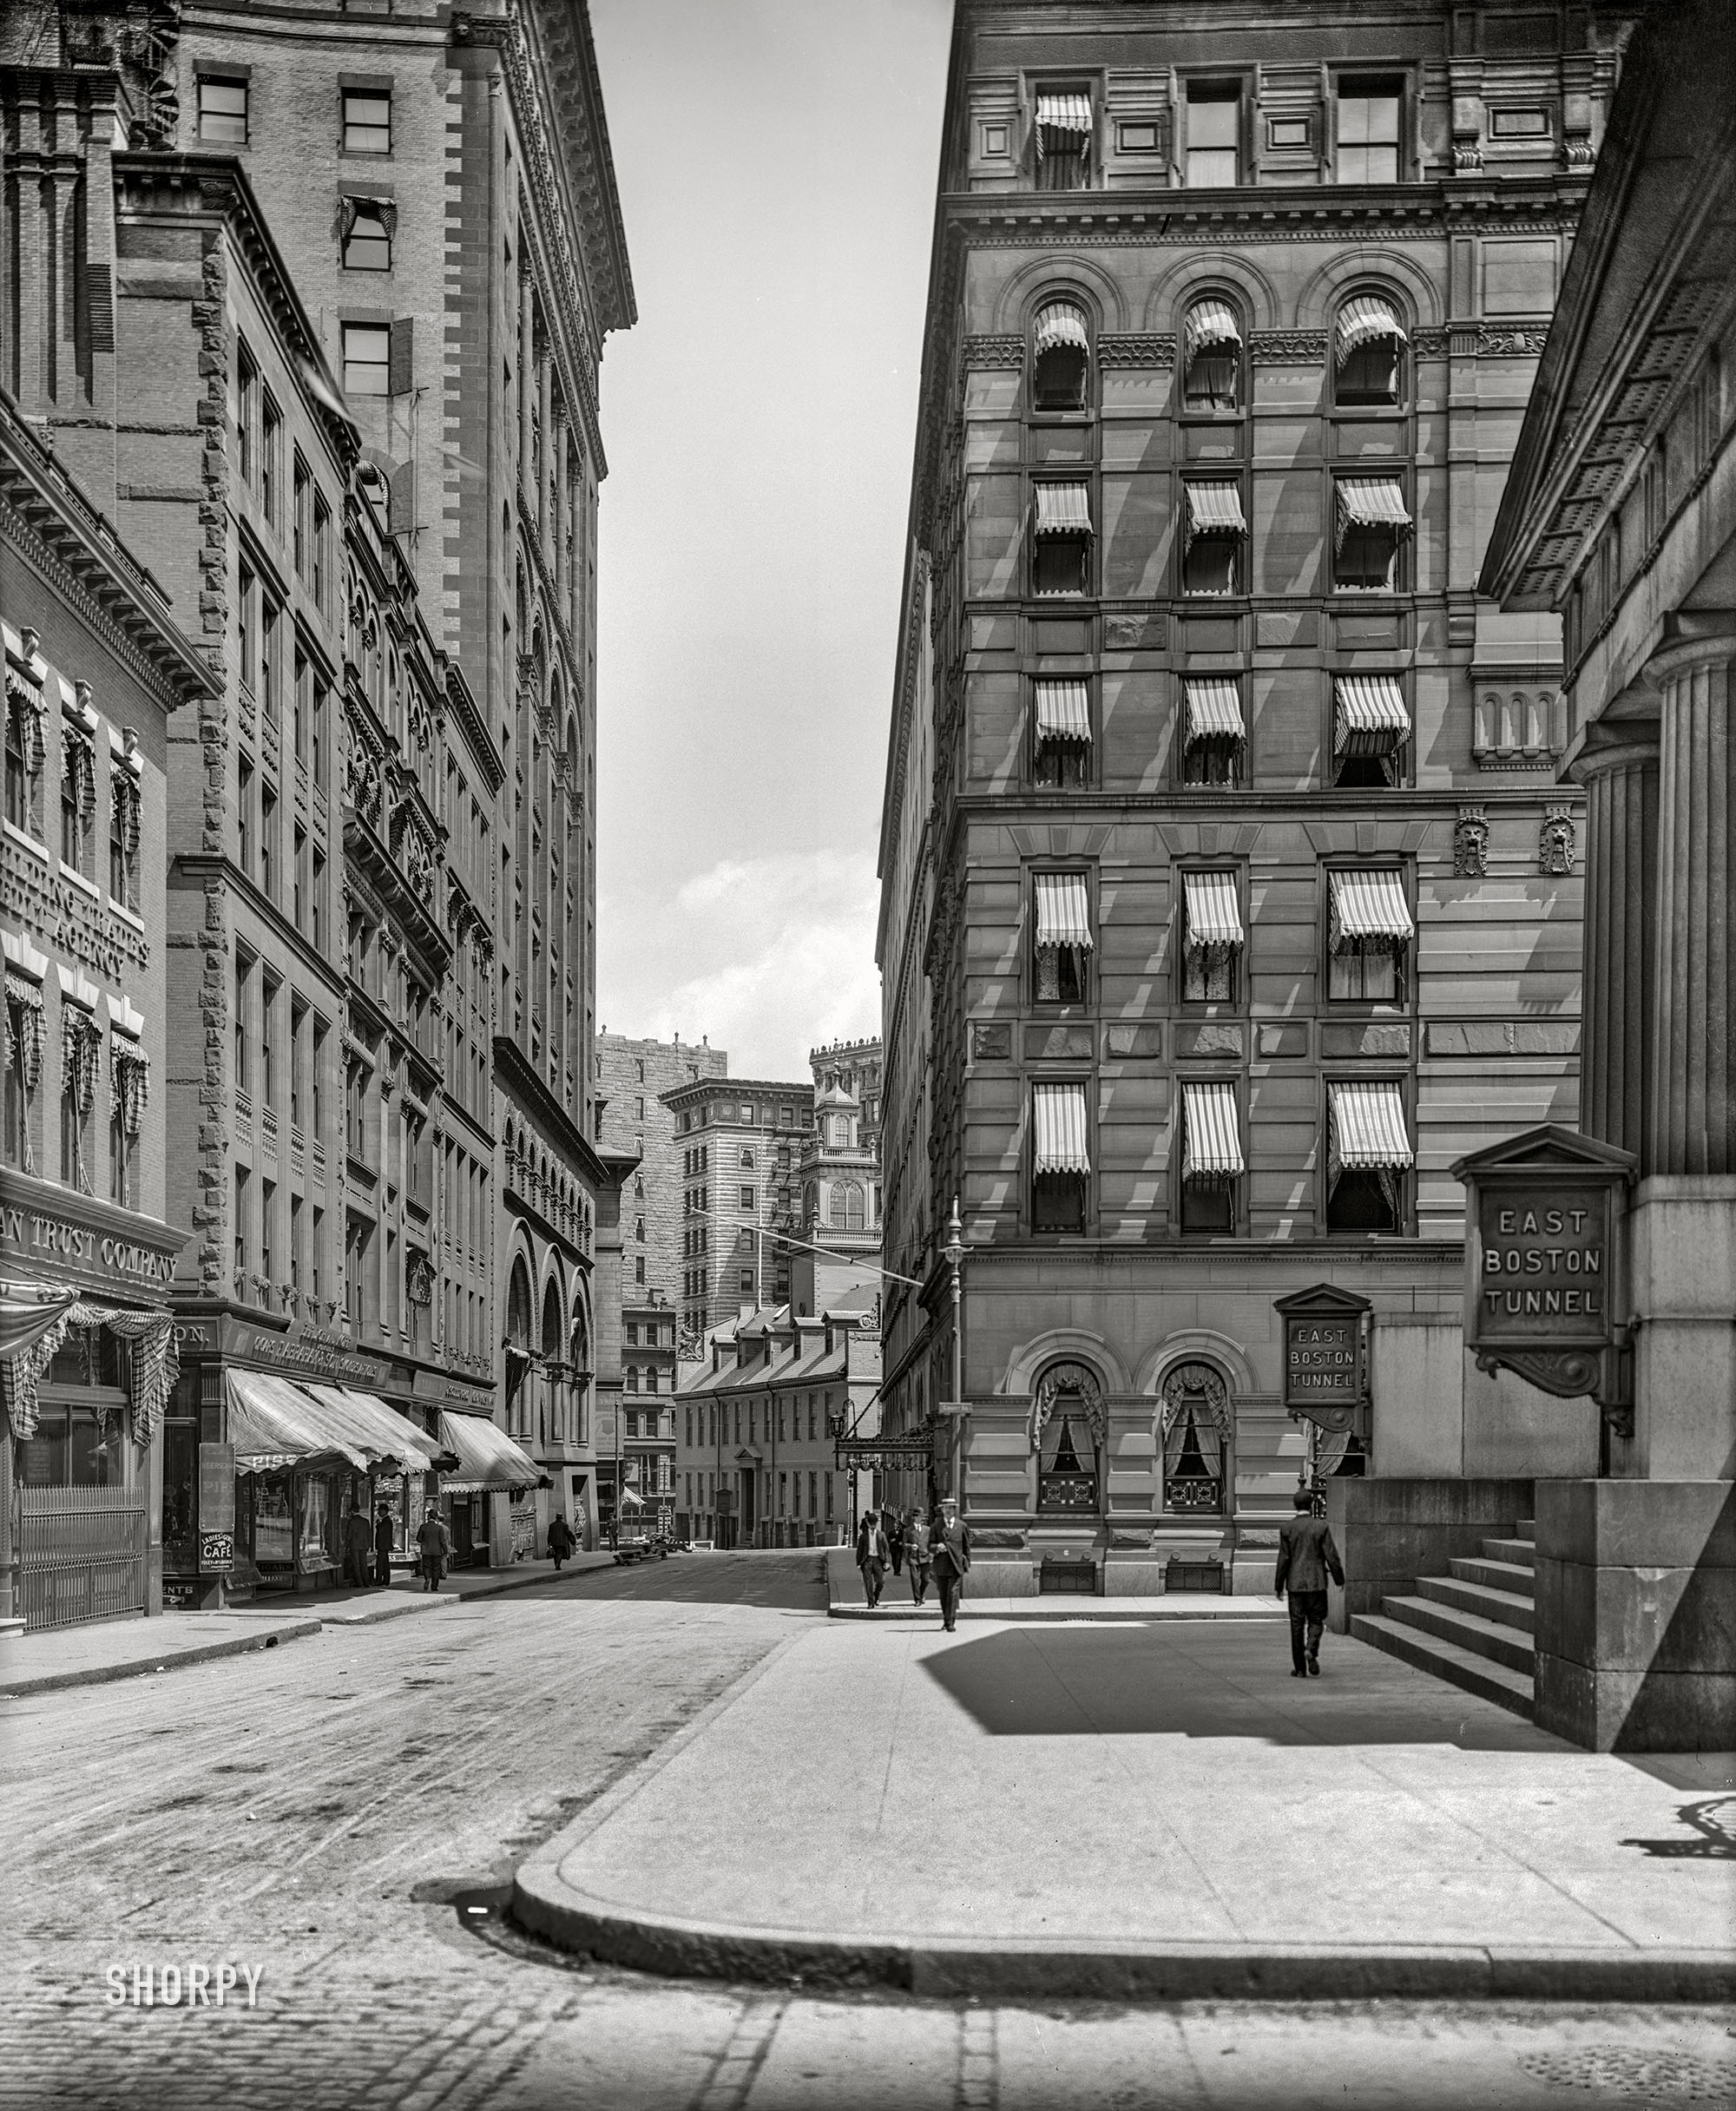 Boston, Massachusetts, circa 1906. "Court Street, Ames Building, Young's Hotel." Plus a subway entrance. 8x10 inch glass negative, Detroit Publishing Company. View full size.